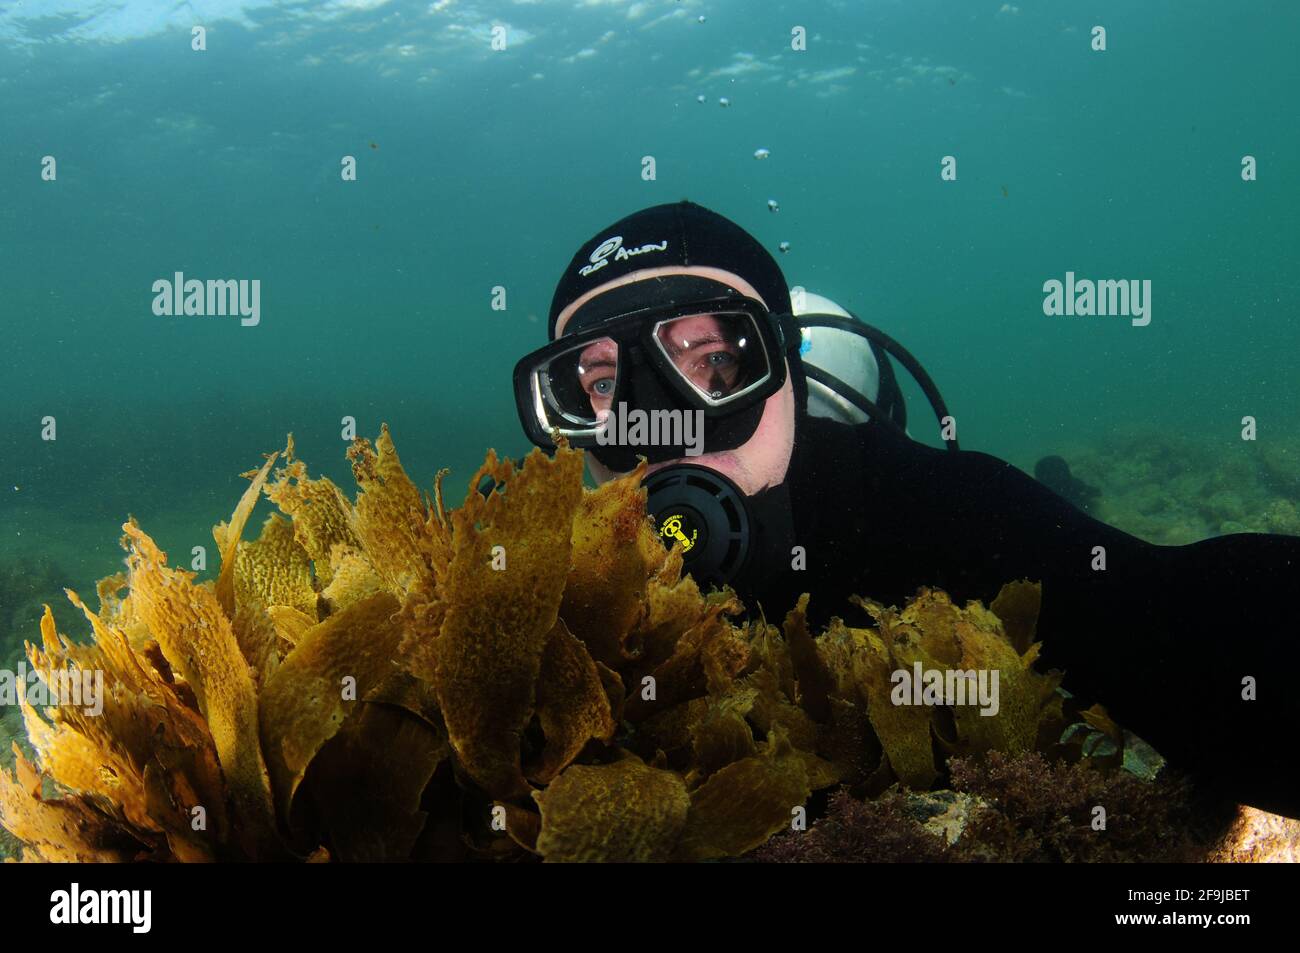 Scuba diver in black wetsuit partially hiding behind brown kelp frond. Stock Photo